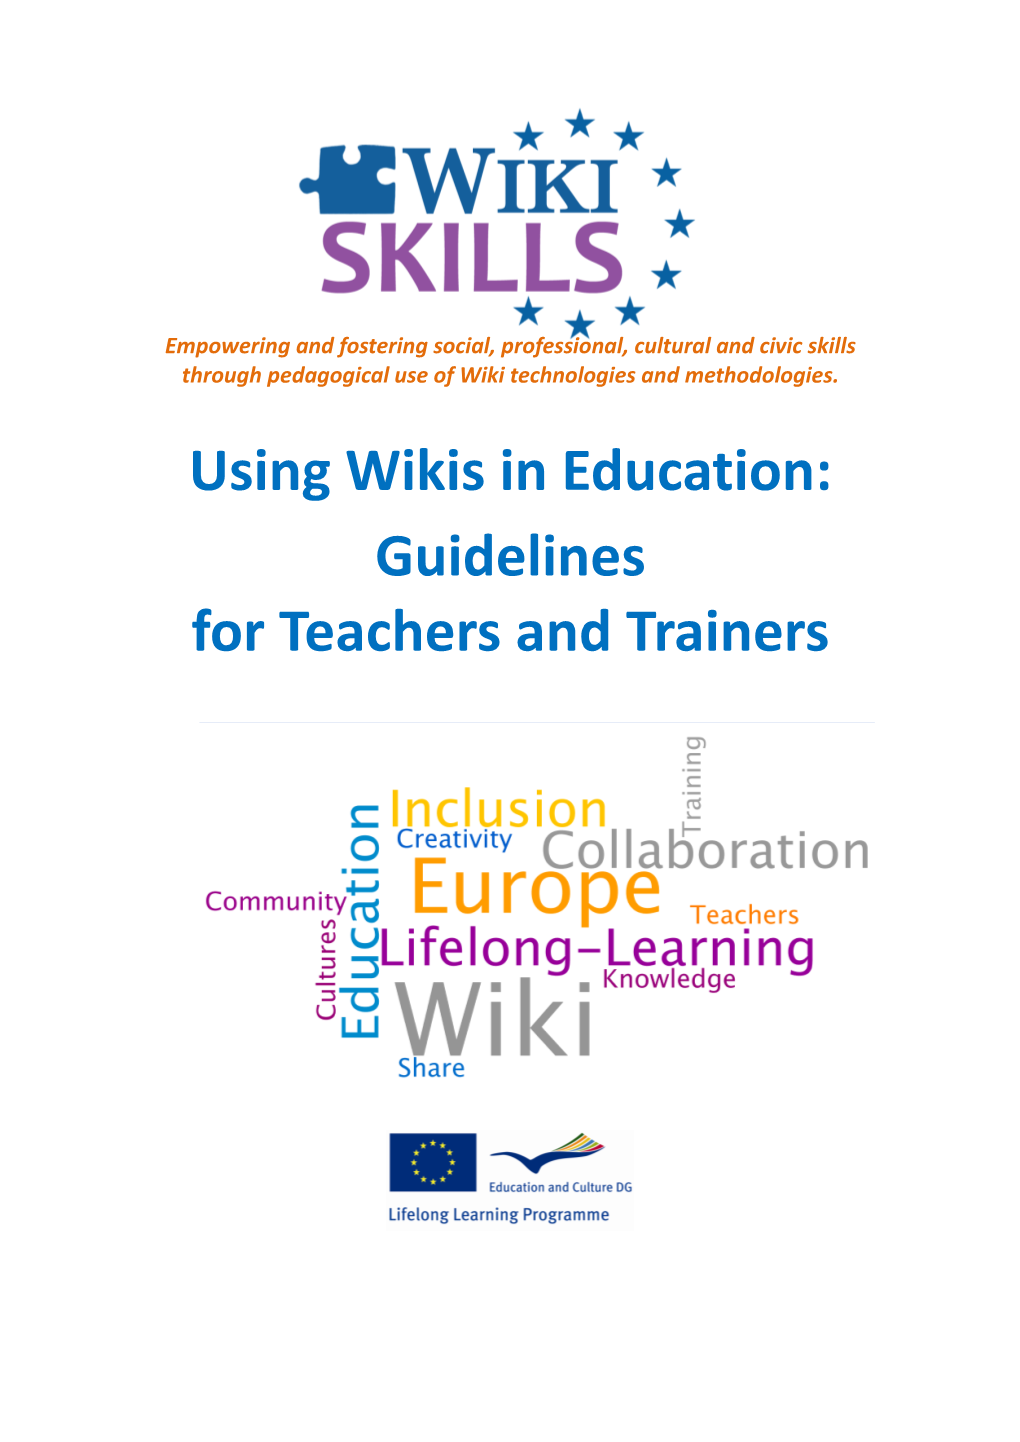 Using Wikis in Education: Guidelines for Teachers and Trainers